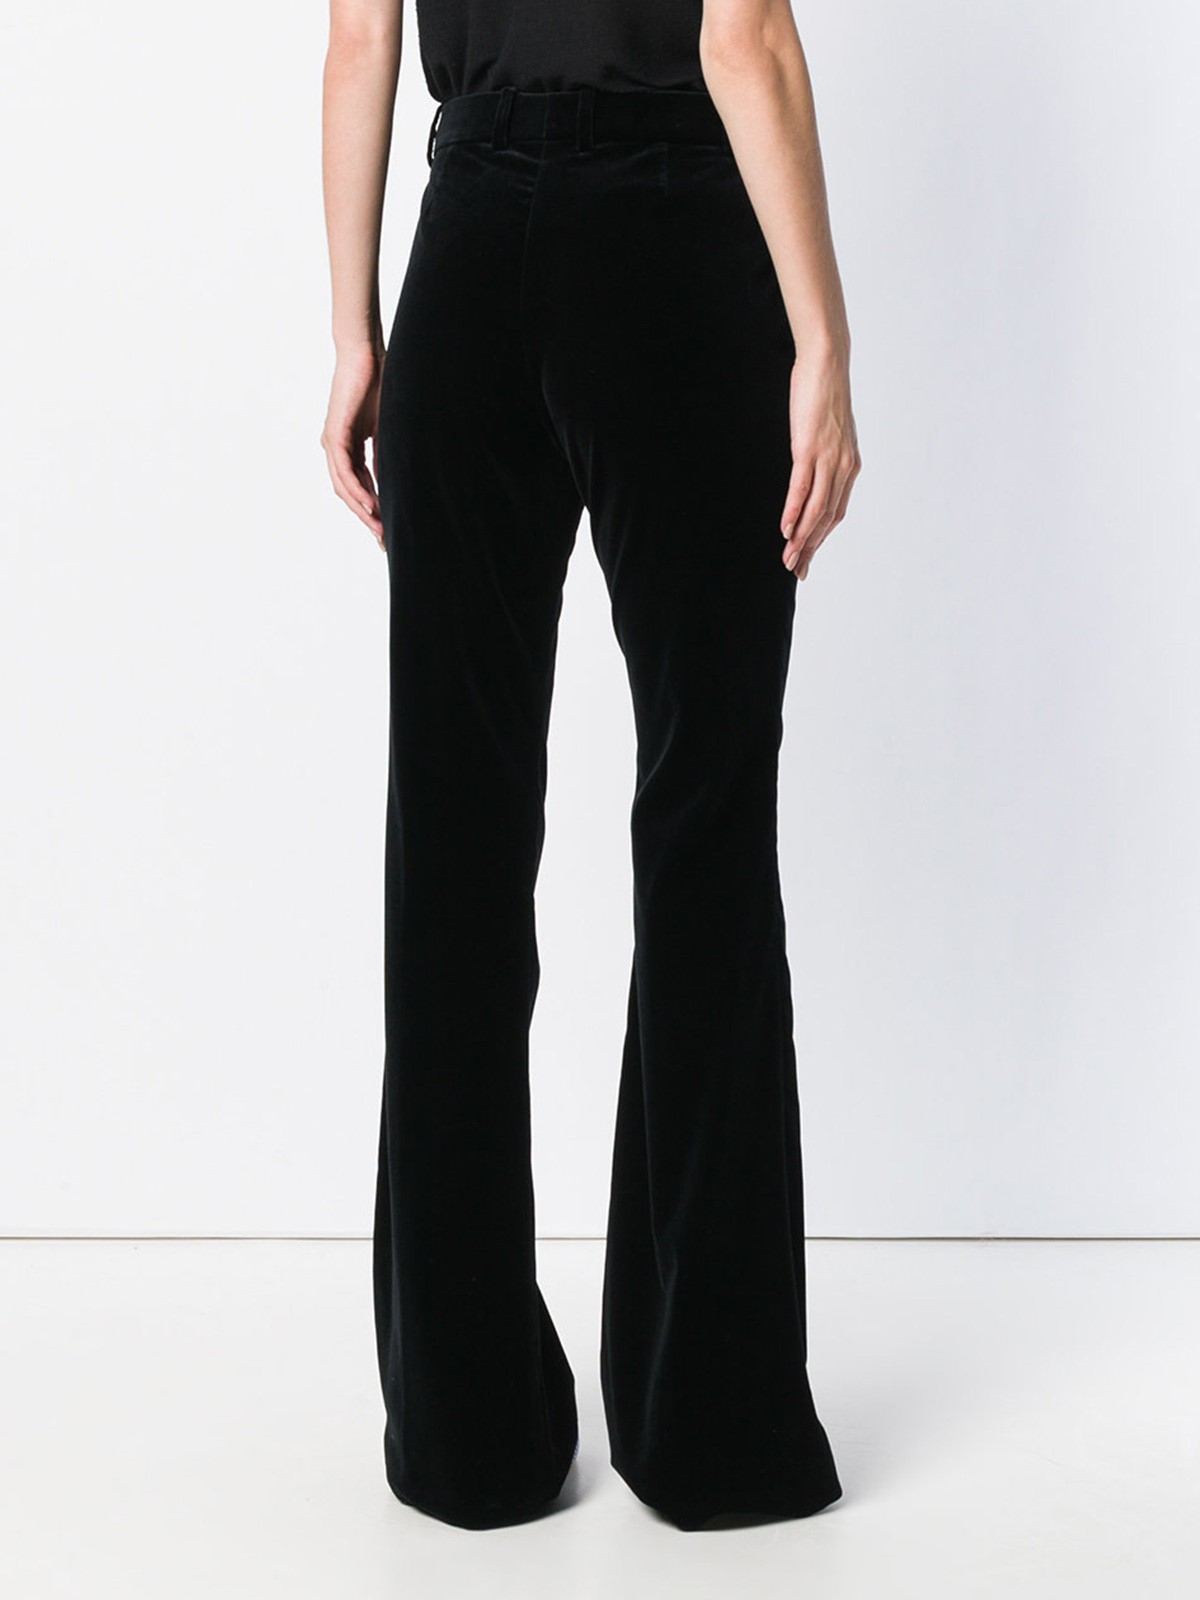 gucci HIGH WAISTED TROUSERS available on montiboutique.com - 23020